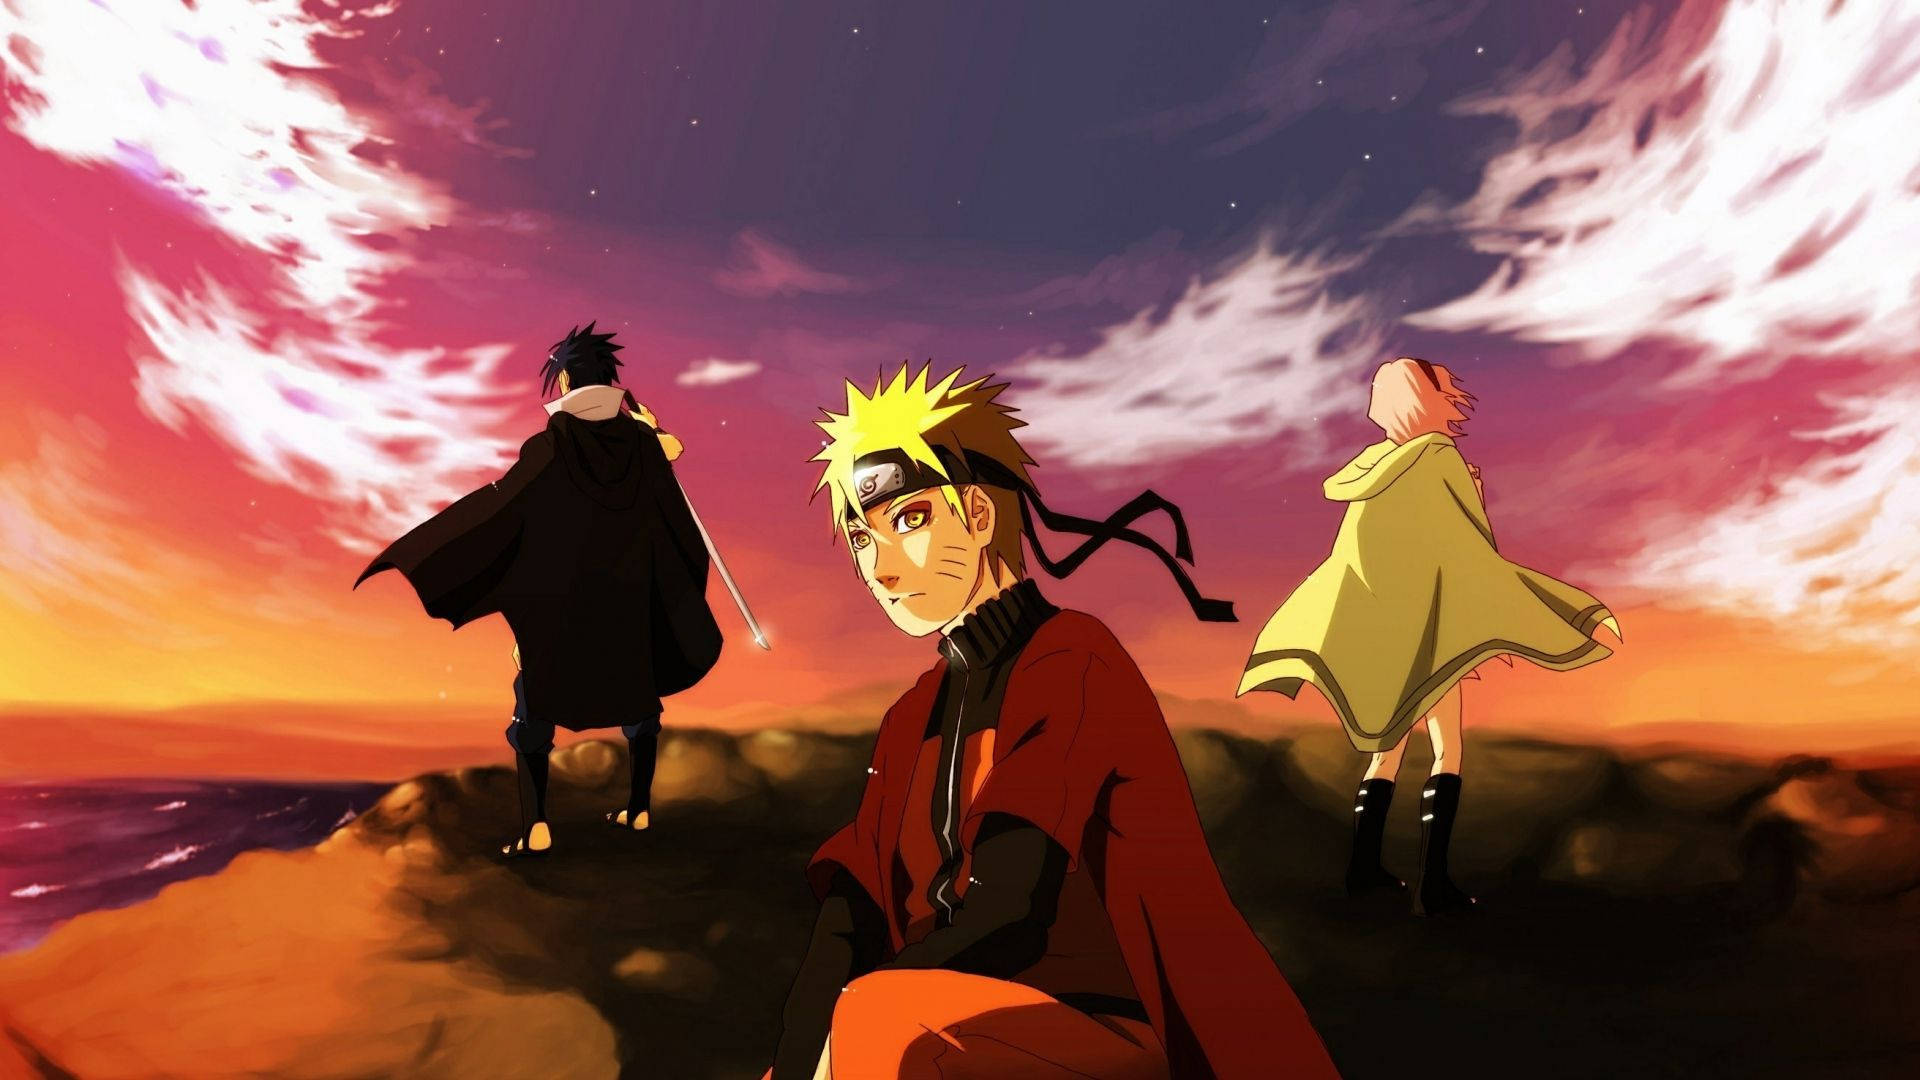 Get ready for an epic adventure with Aesthetic Naruto! Wallpaper